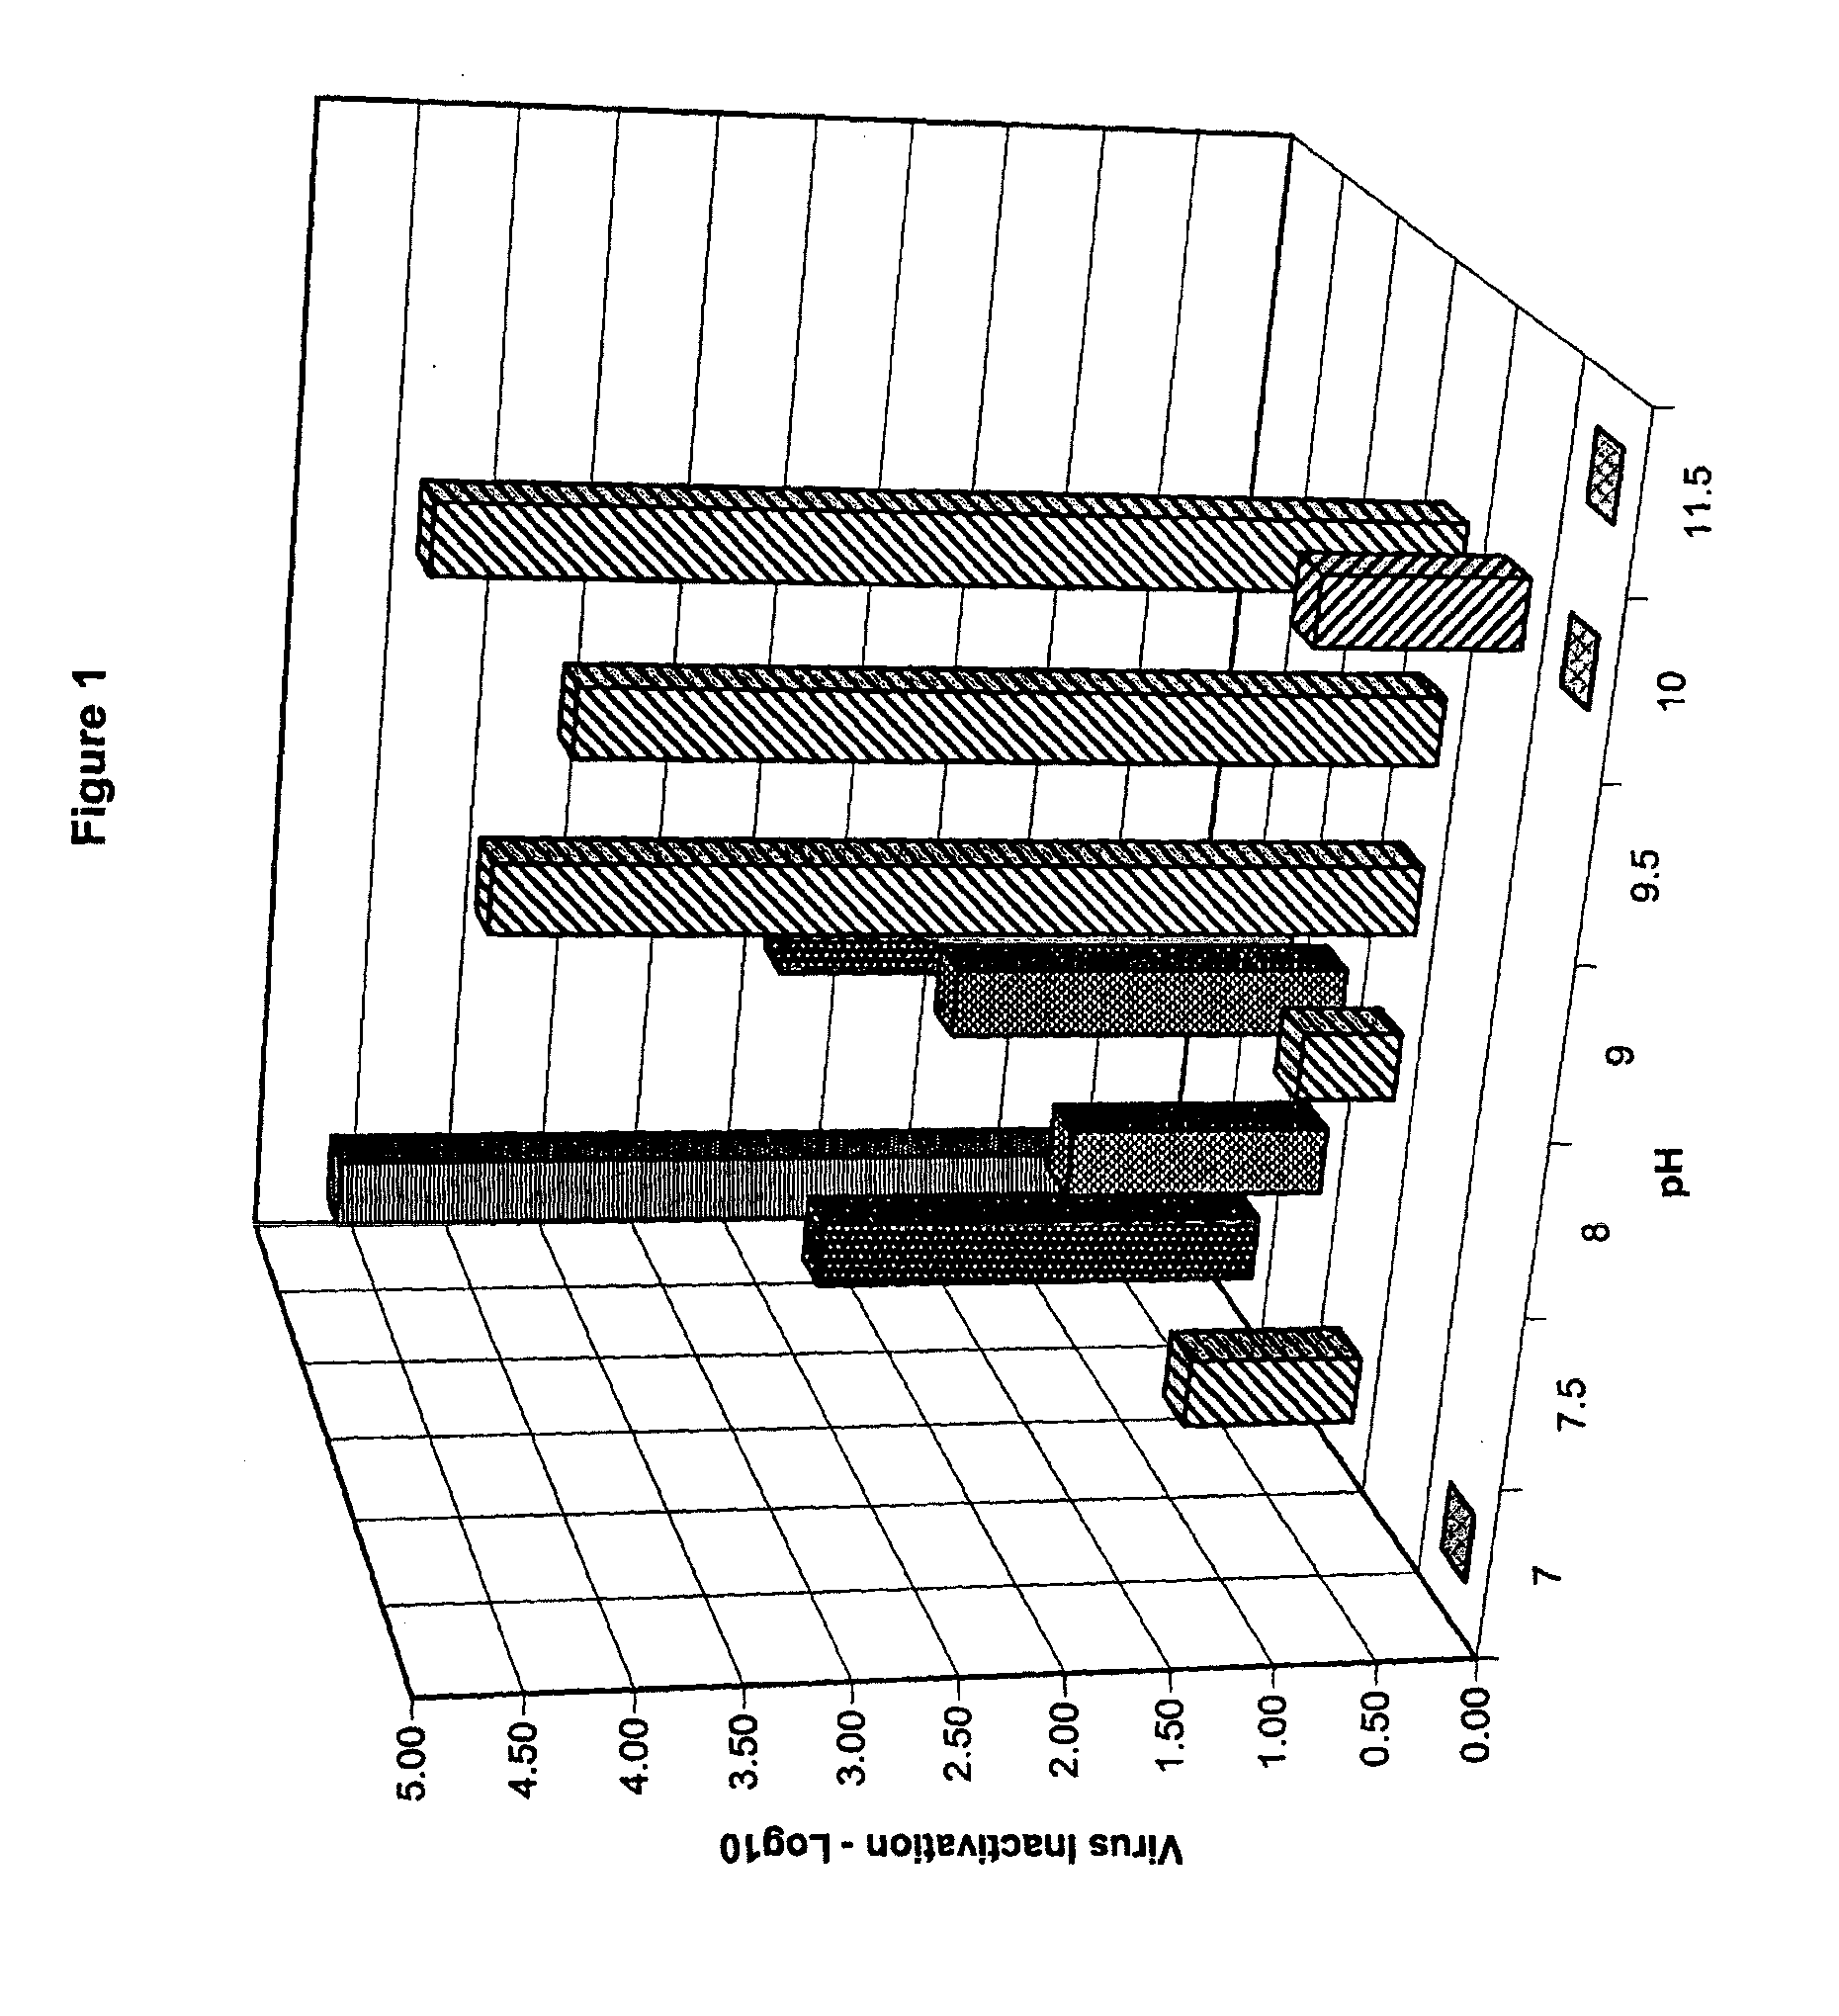 Method and Composition for Disinfecting Hard Surfaces